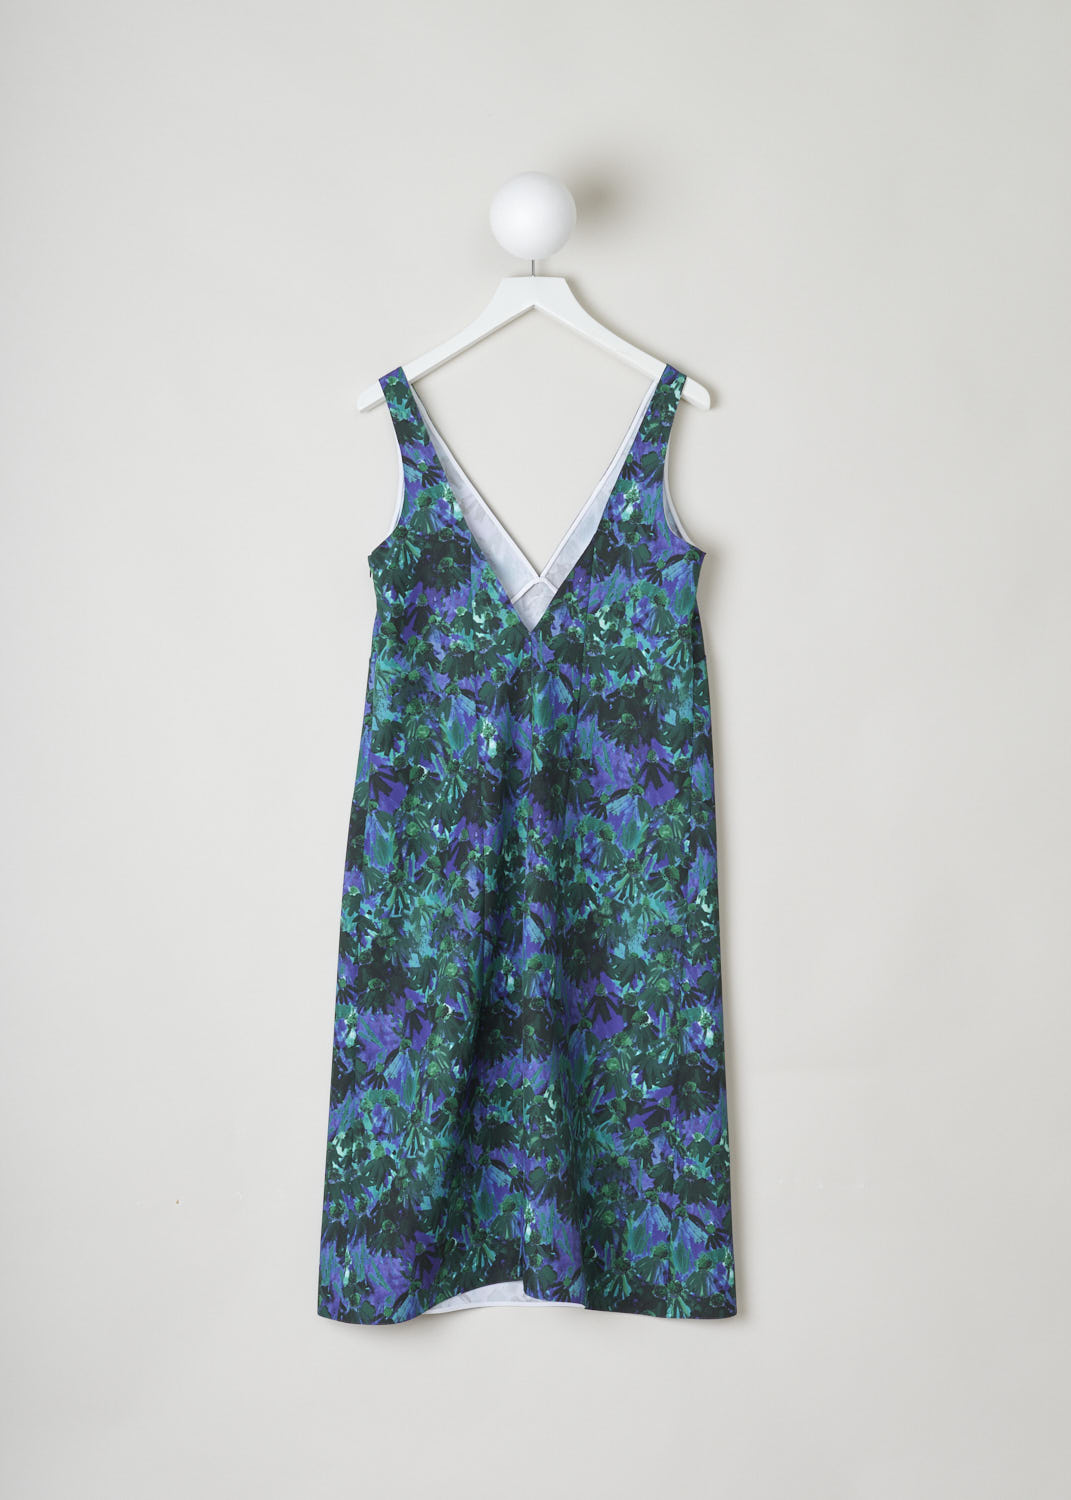 PLAN C, MULTICOLORED FLORAL SHIFT DRESS, ABCAA09NB8_TP069_FIV02_GREEN_CLOVER, Back, Front, This sleeveless midi dress has a shift style silhouette with a V-neckline. The dress has a multicolored floral print throughout. The dress has a concealed side zipper. 
